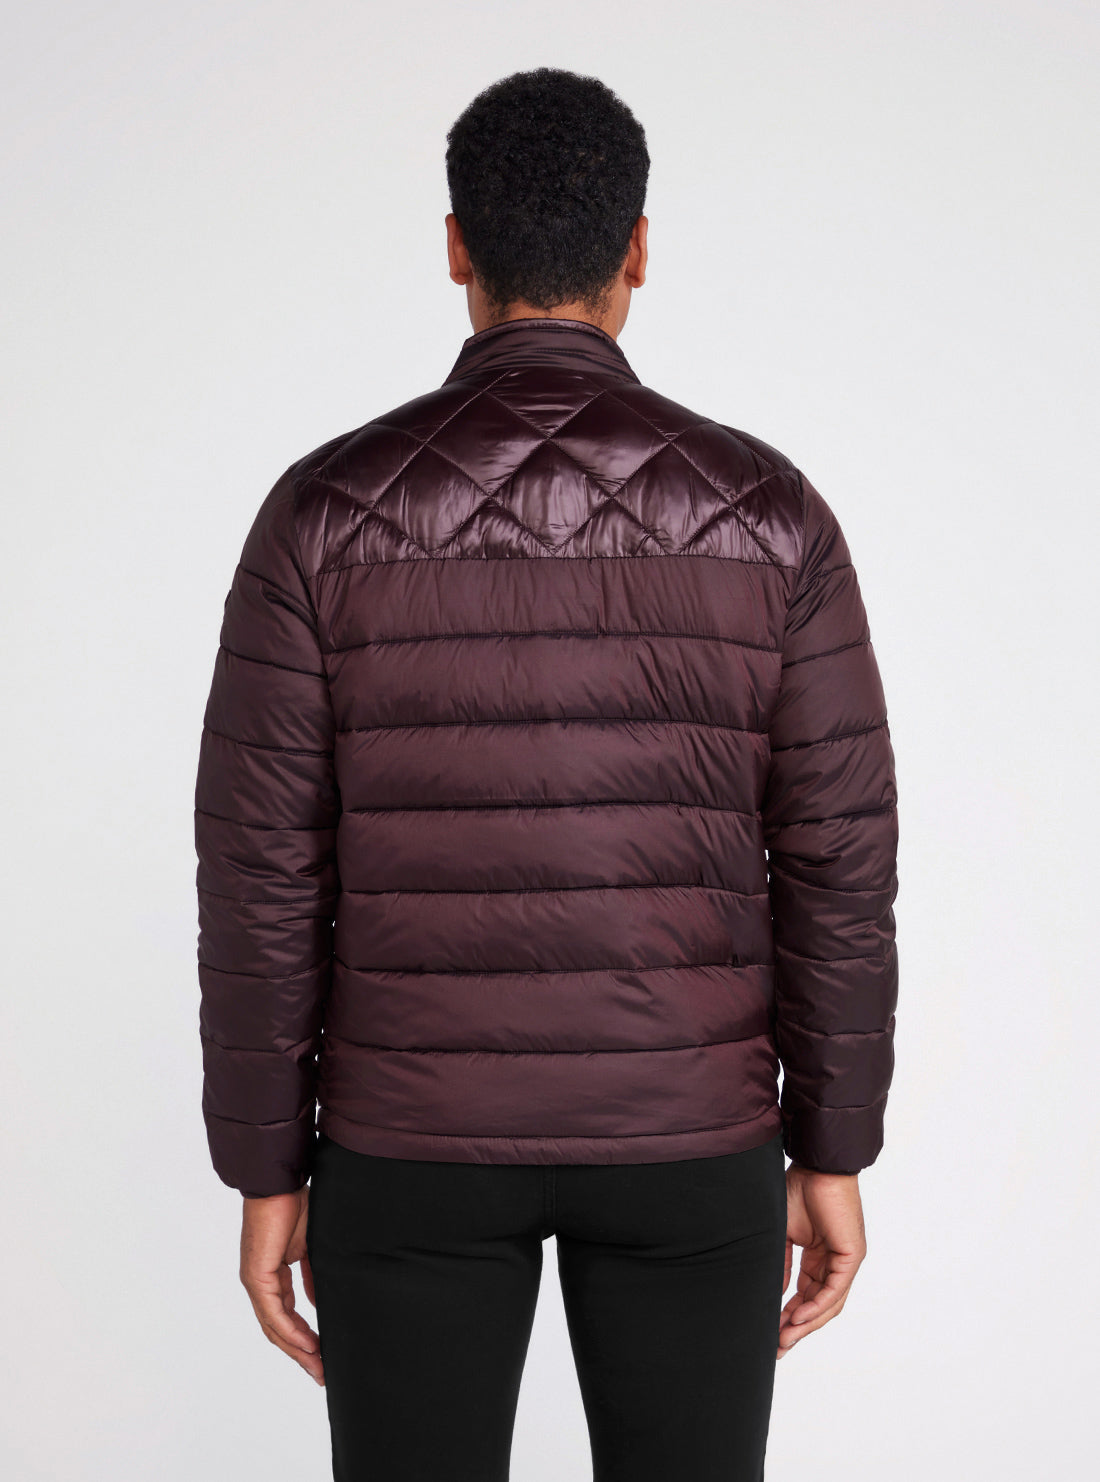 Eco Maroon Lightweight Puffer Jacket | GUESS men's apparel | back view